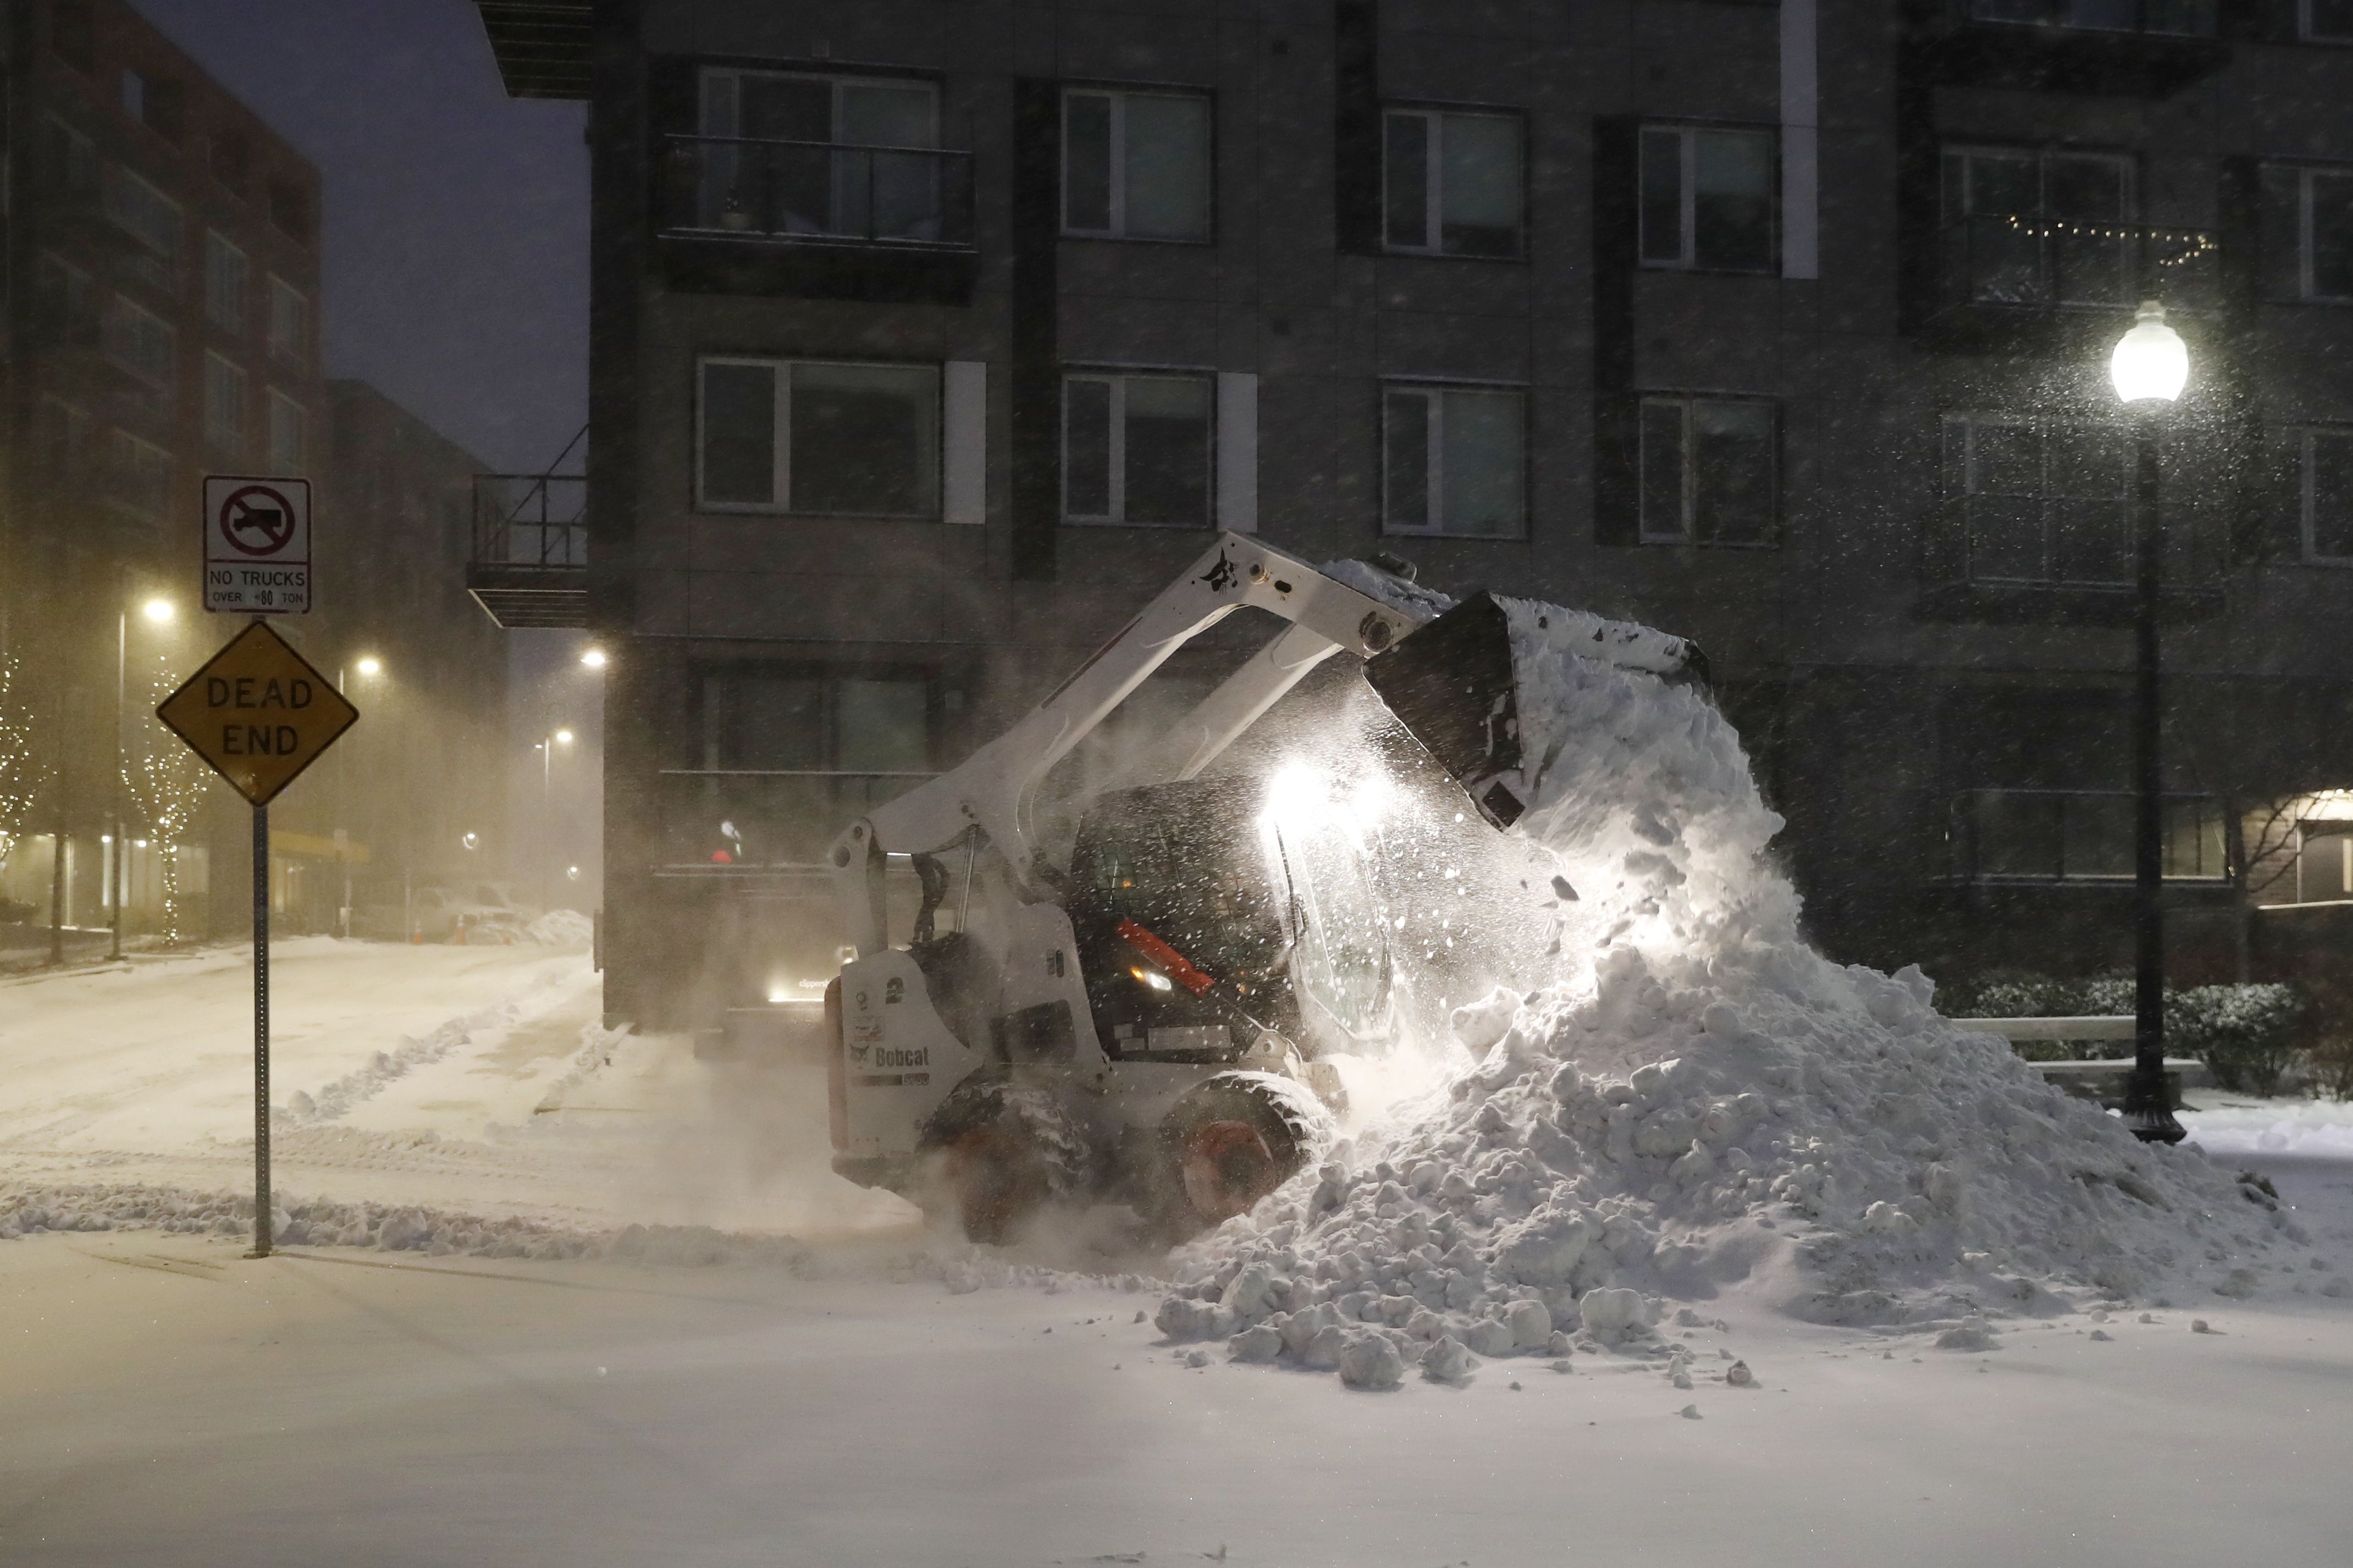 A frontend loader removes snow at Clipper Ship Wharf in the East Boston neighborhood of Boston.